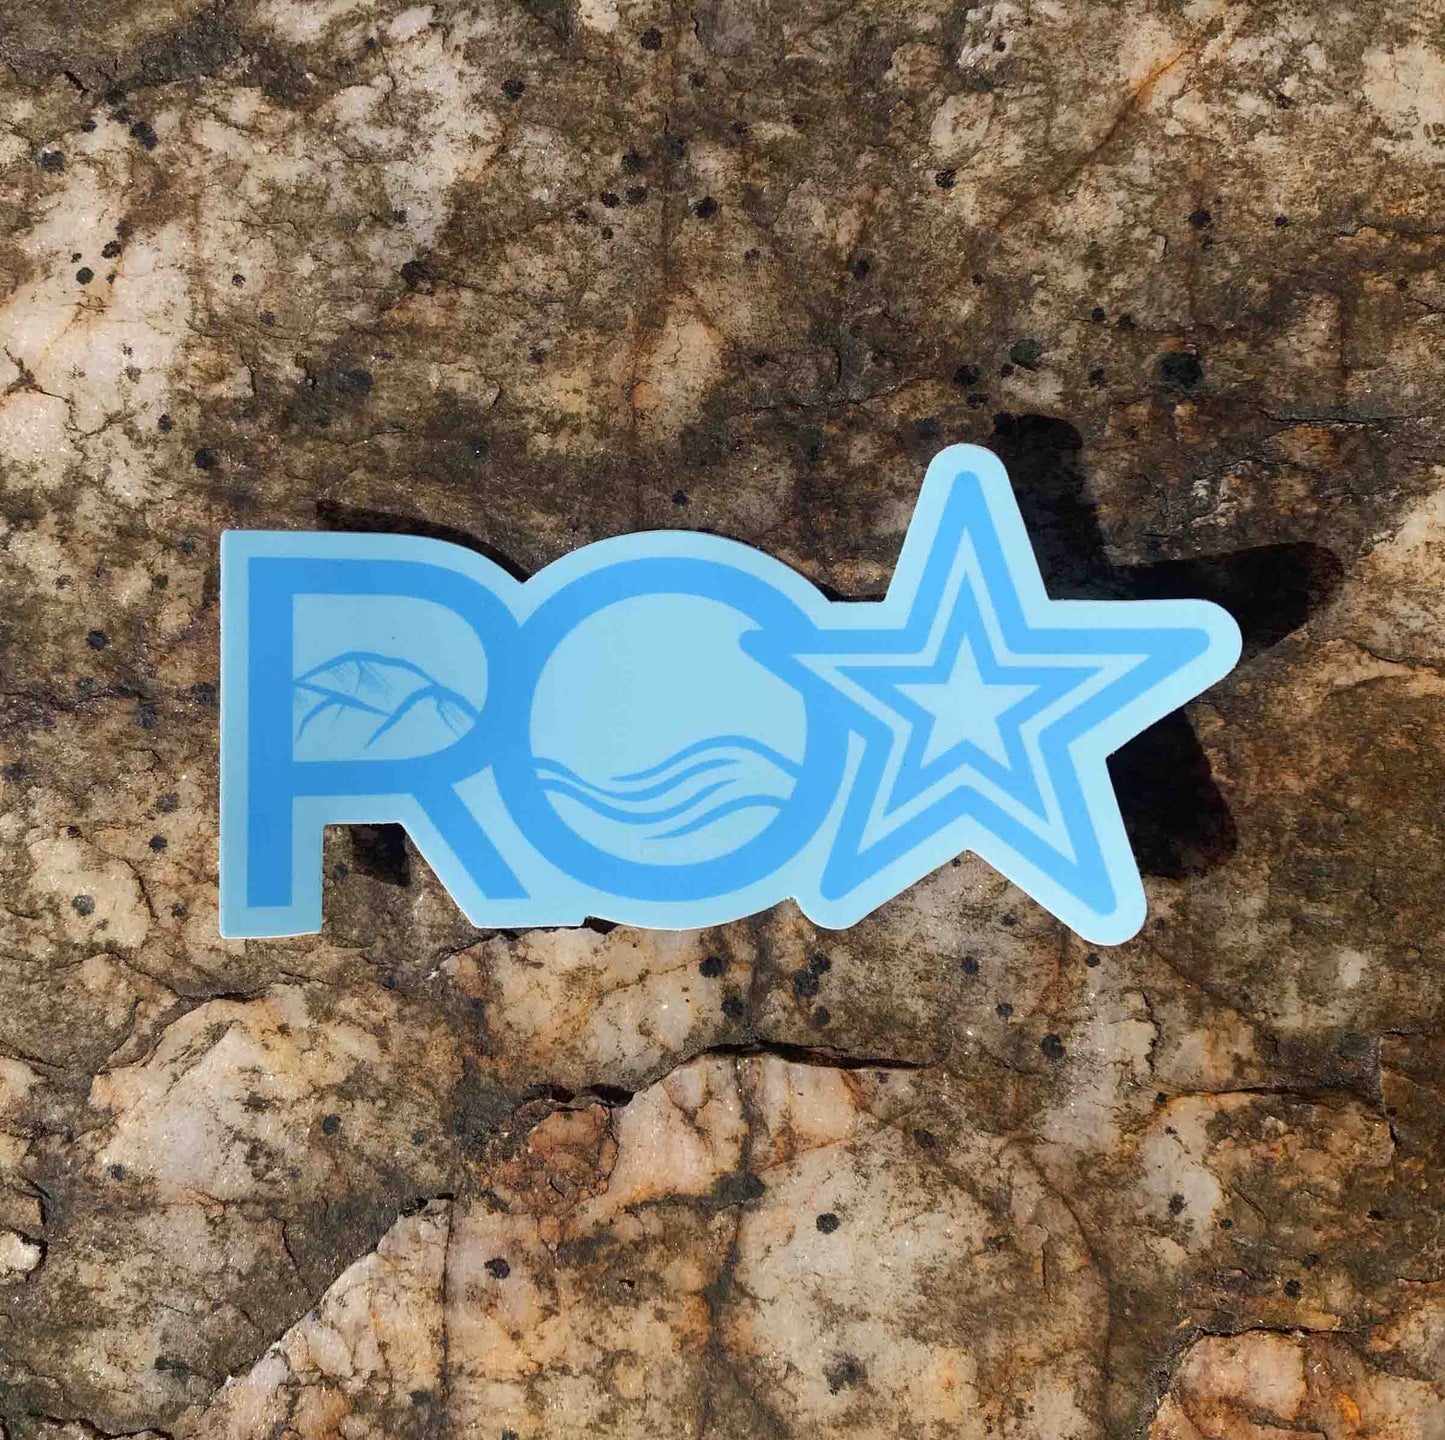 Roanoke Lifestyle - Decal Stickers